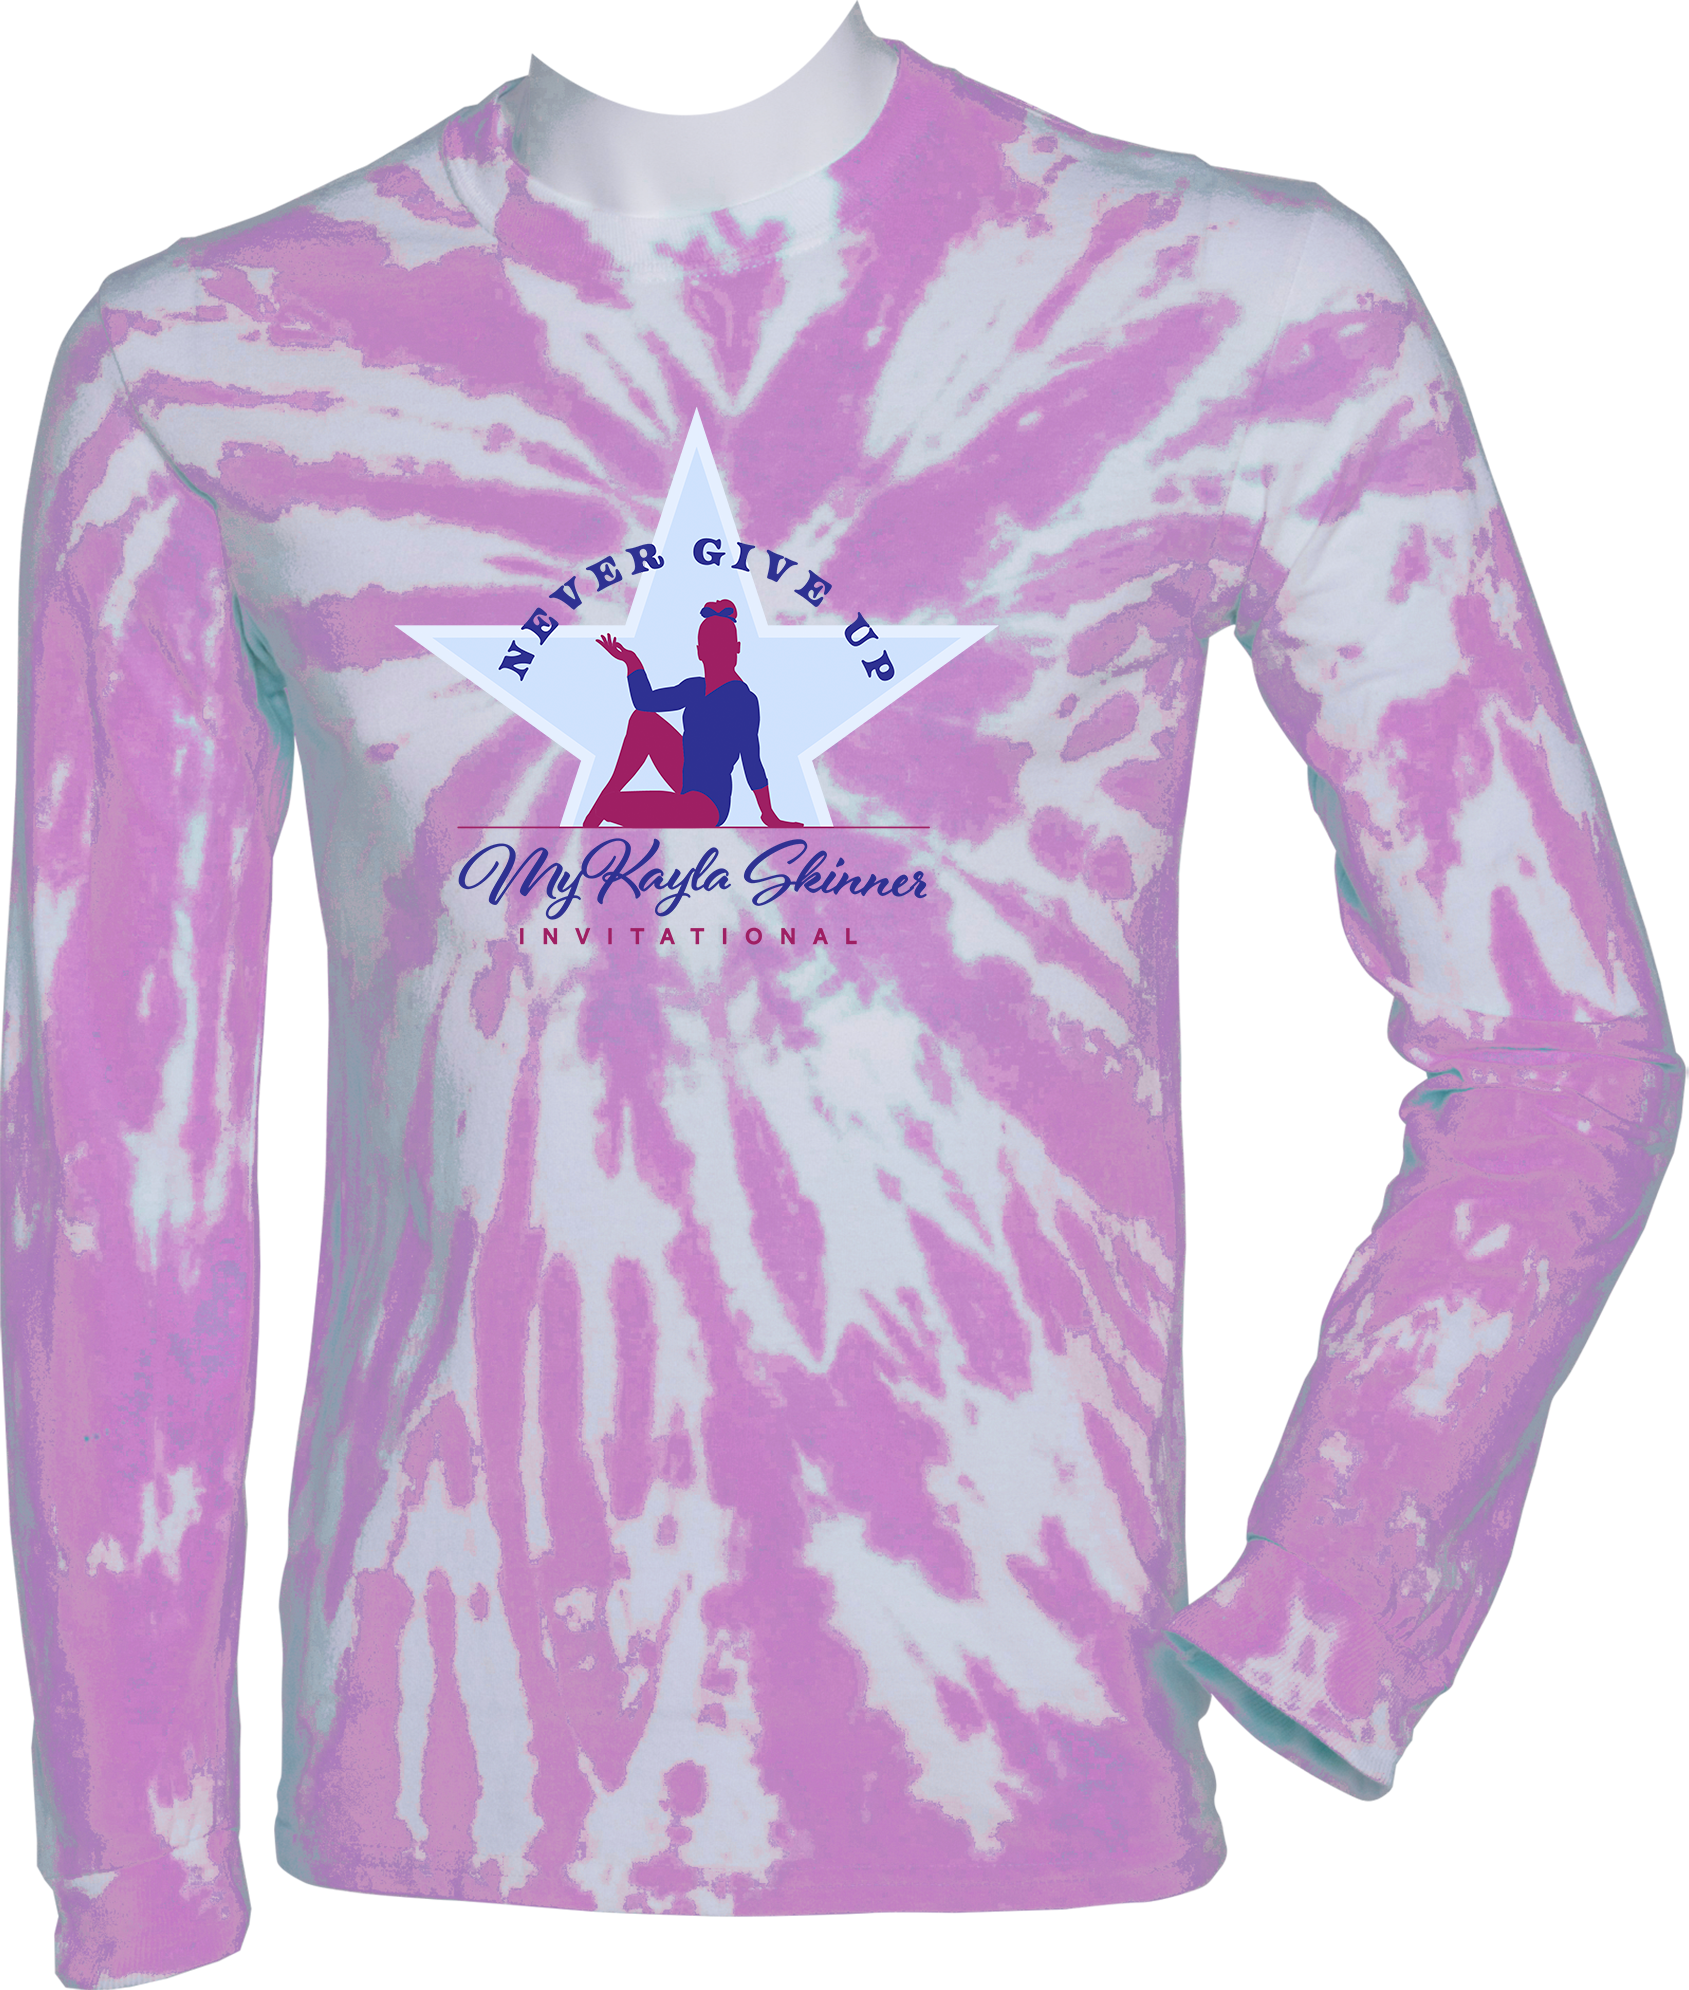 TIE-DYE LONG SLEEVES - 2023 Never Give Up with MyKayla Skinner